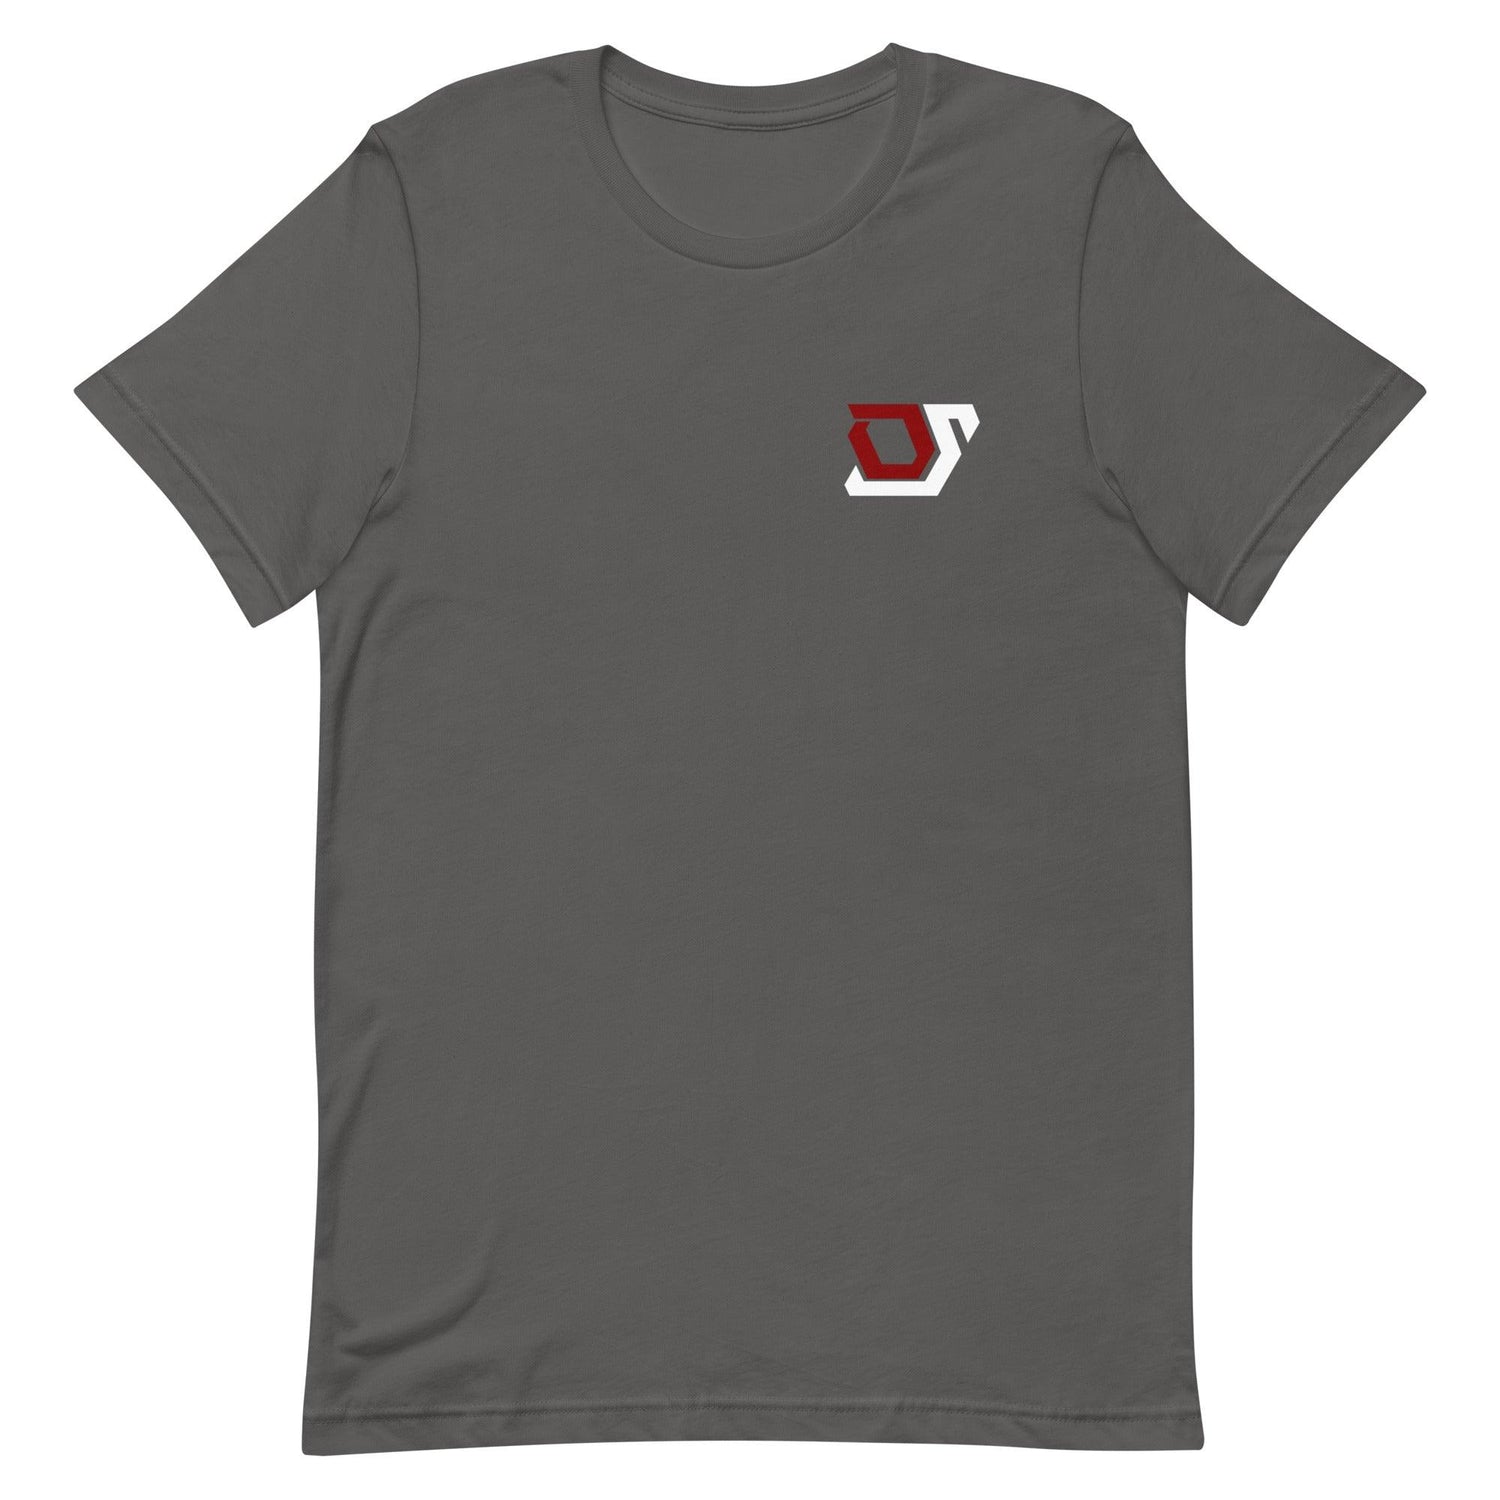 Daylan Smothers "Essentials" t-shirt - Fan Arch